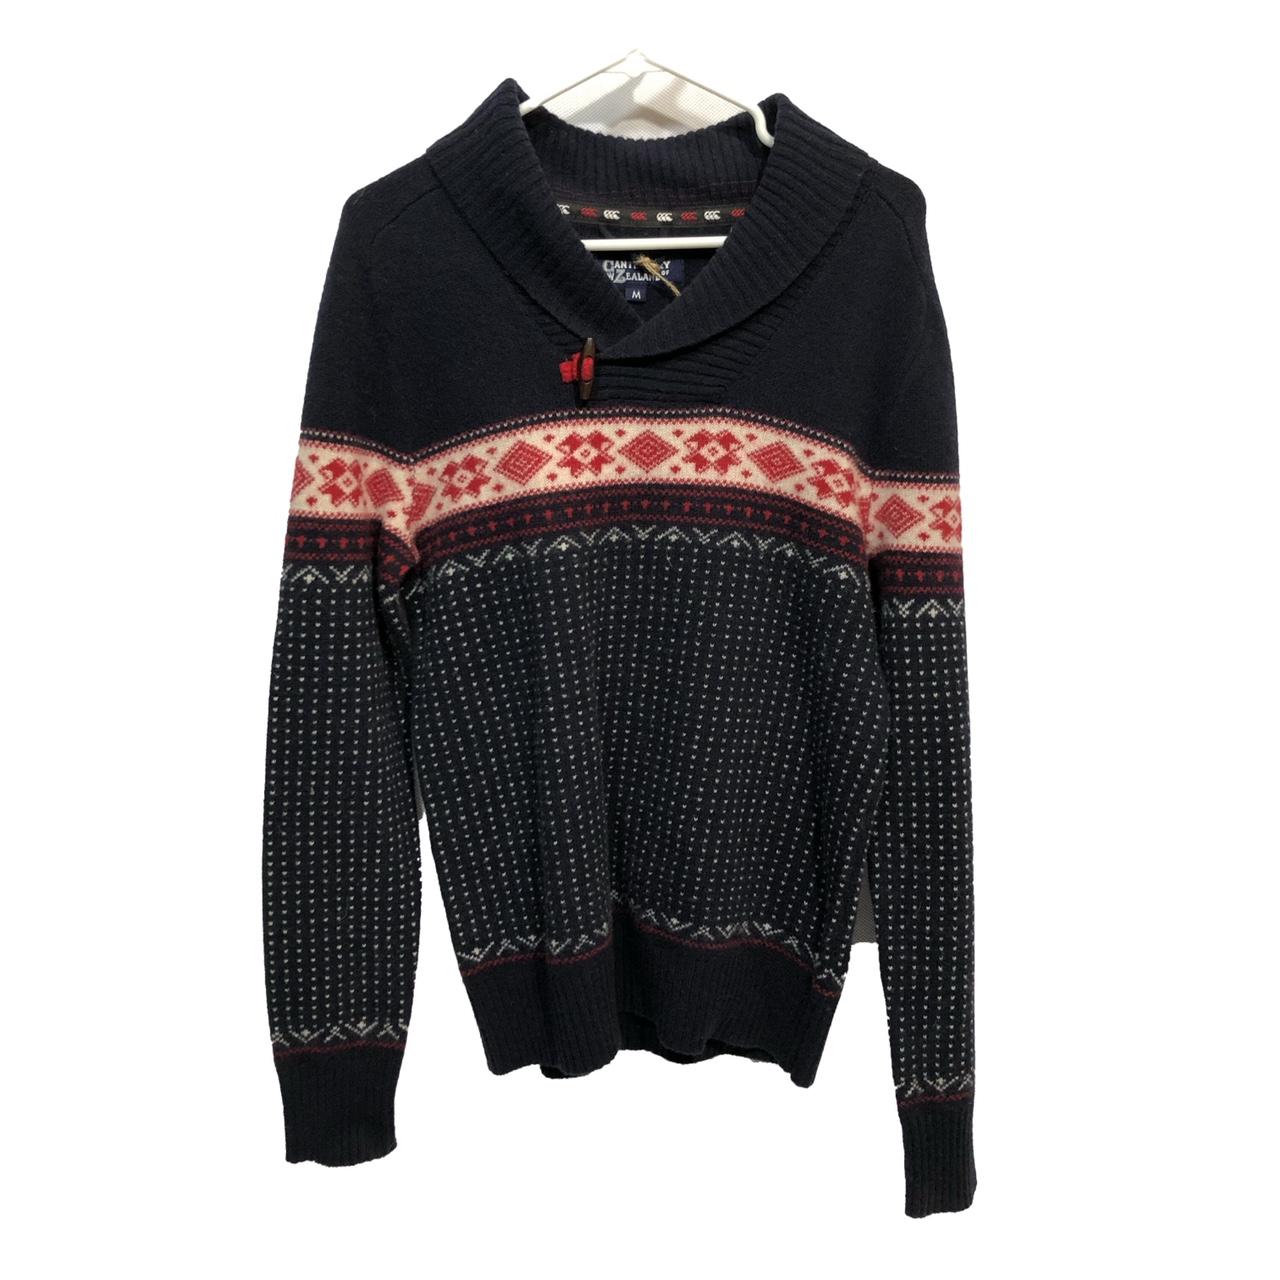 Canterbury Men's Navy and Red Jumper